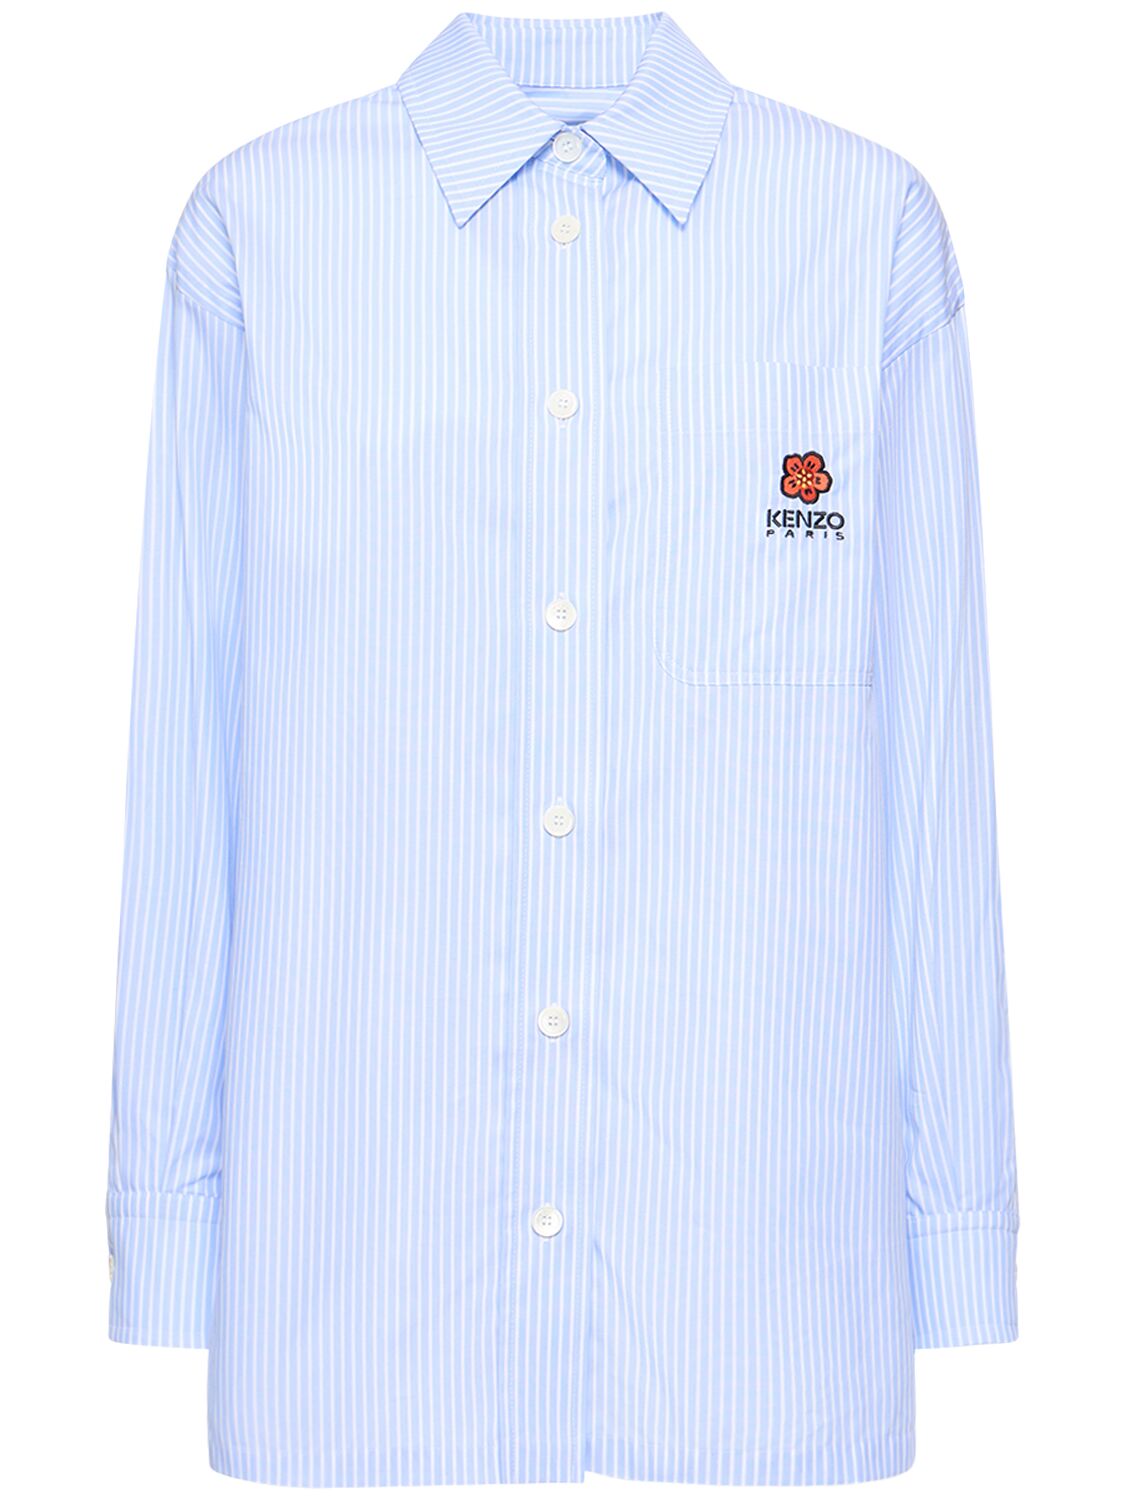 Kenzo Crest Oversize Striped Cotton Shirt In Blue